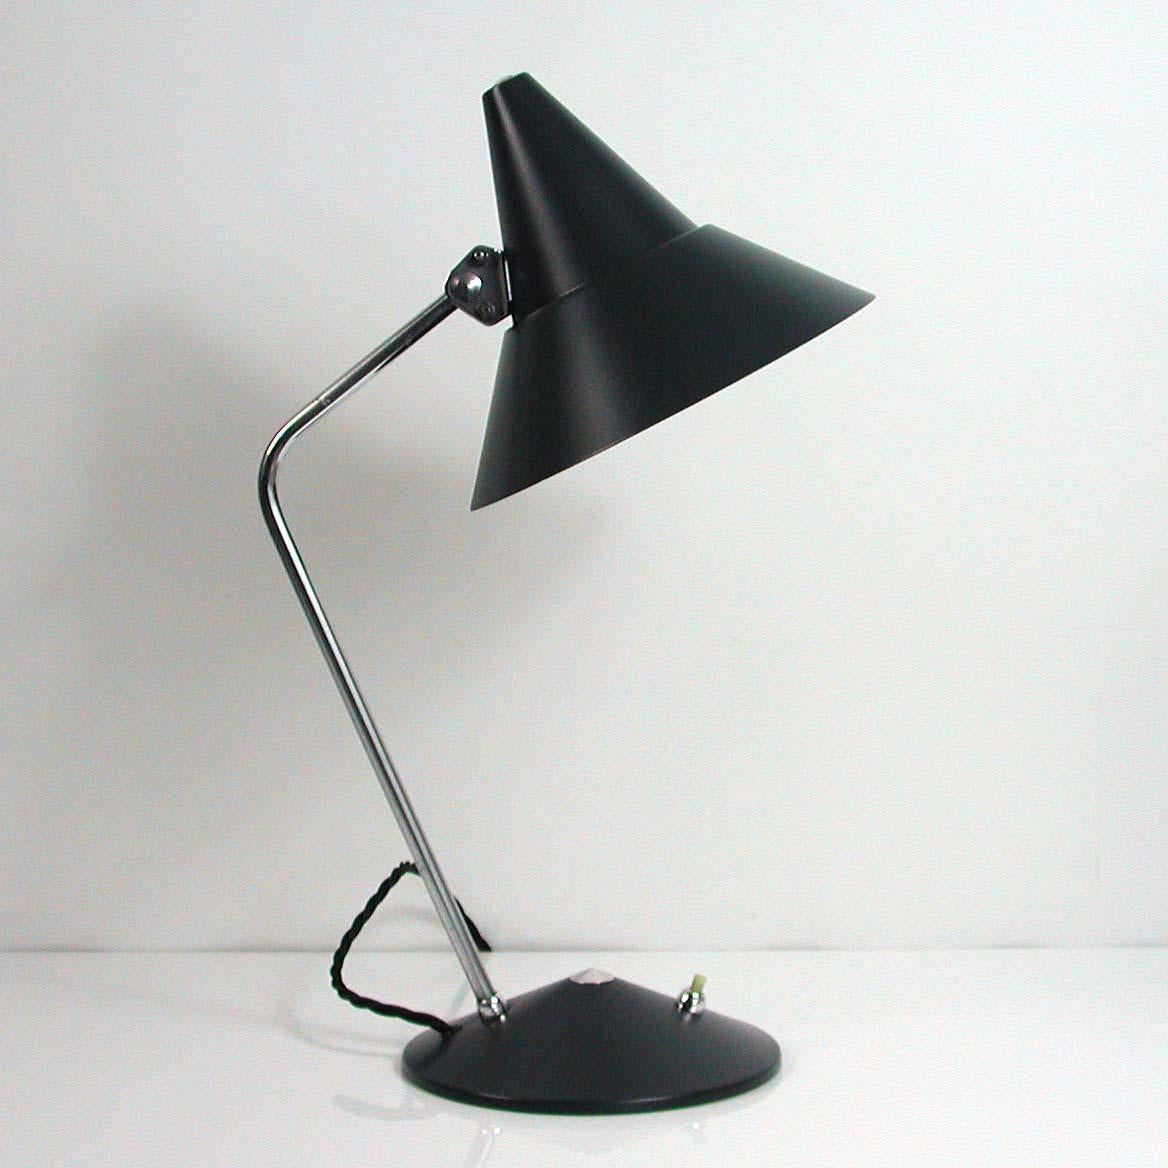 This desk lamp was designed and manufactured by HELO Leuchten in the 1950s. It features a dark grey lacquered metal lampshade and base and chrome lamp arm with adjustable lampshade.

The lamp has been newly rewired with black fabric cord and is in